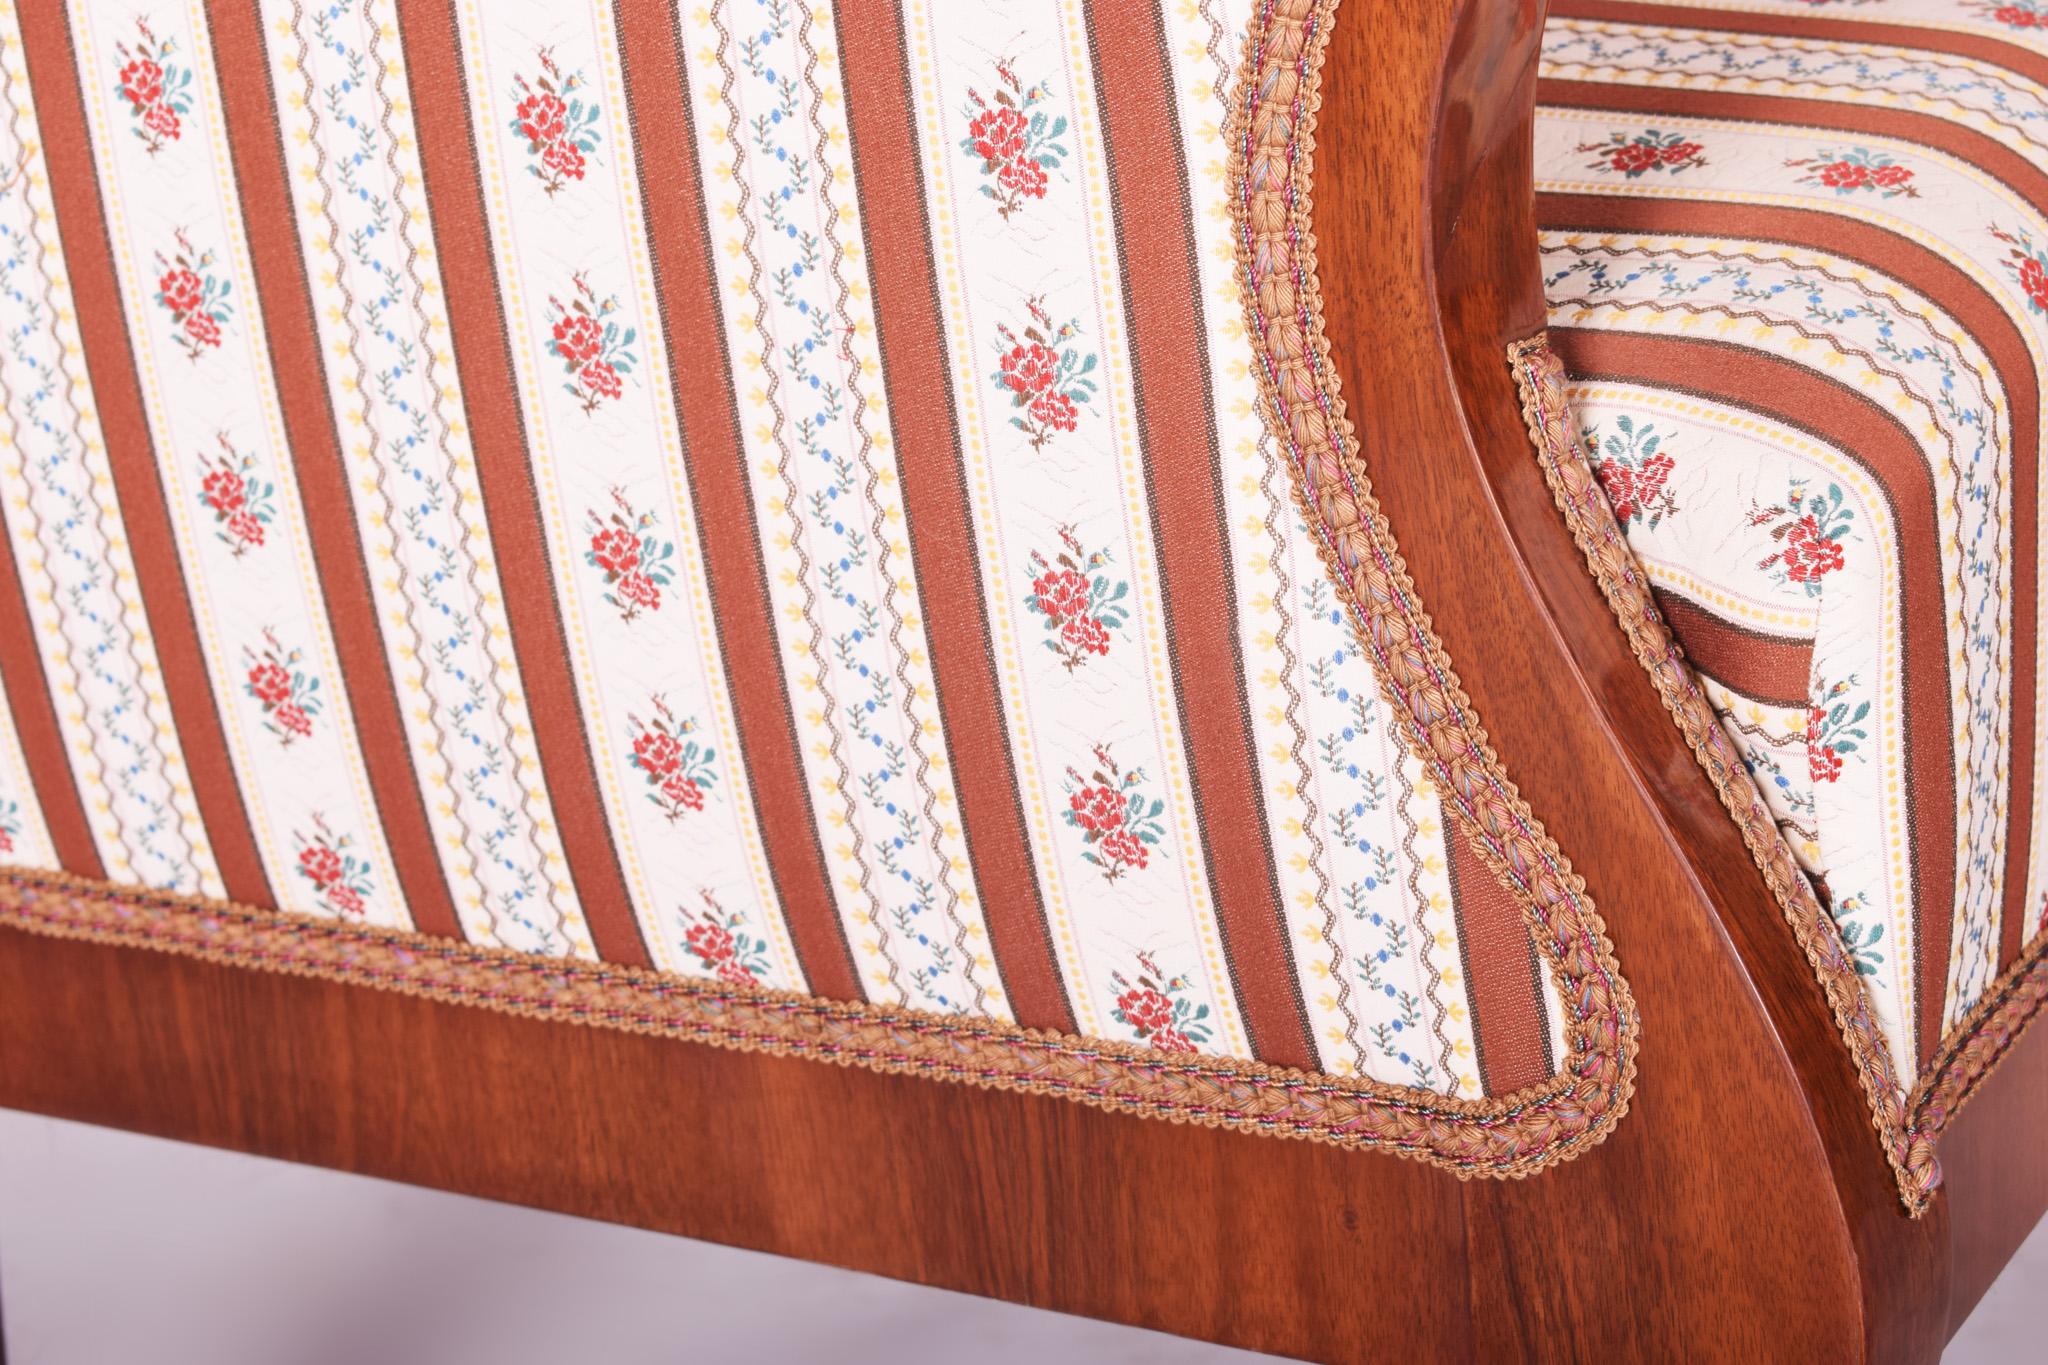 Biedermeier armchair. Material walnut.
Completely restored, surface made by shellac polish
New upholstery and fabric
Source: Bohemia
Period: 1820-1830.
 